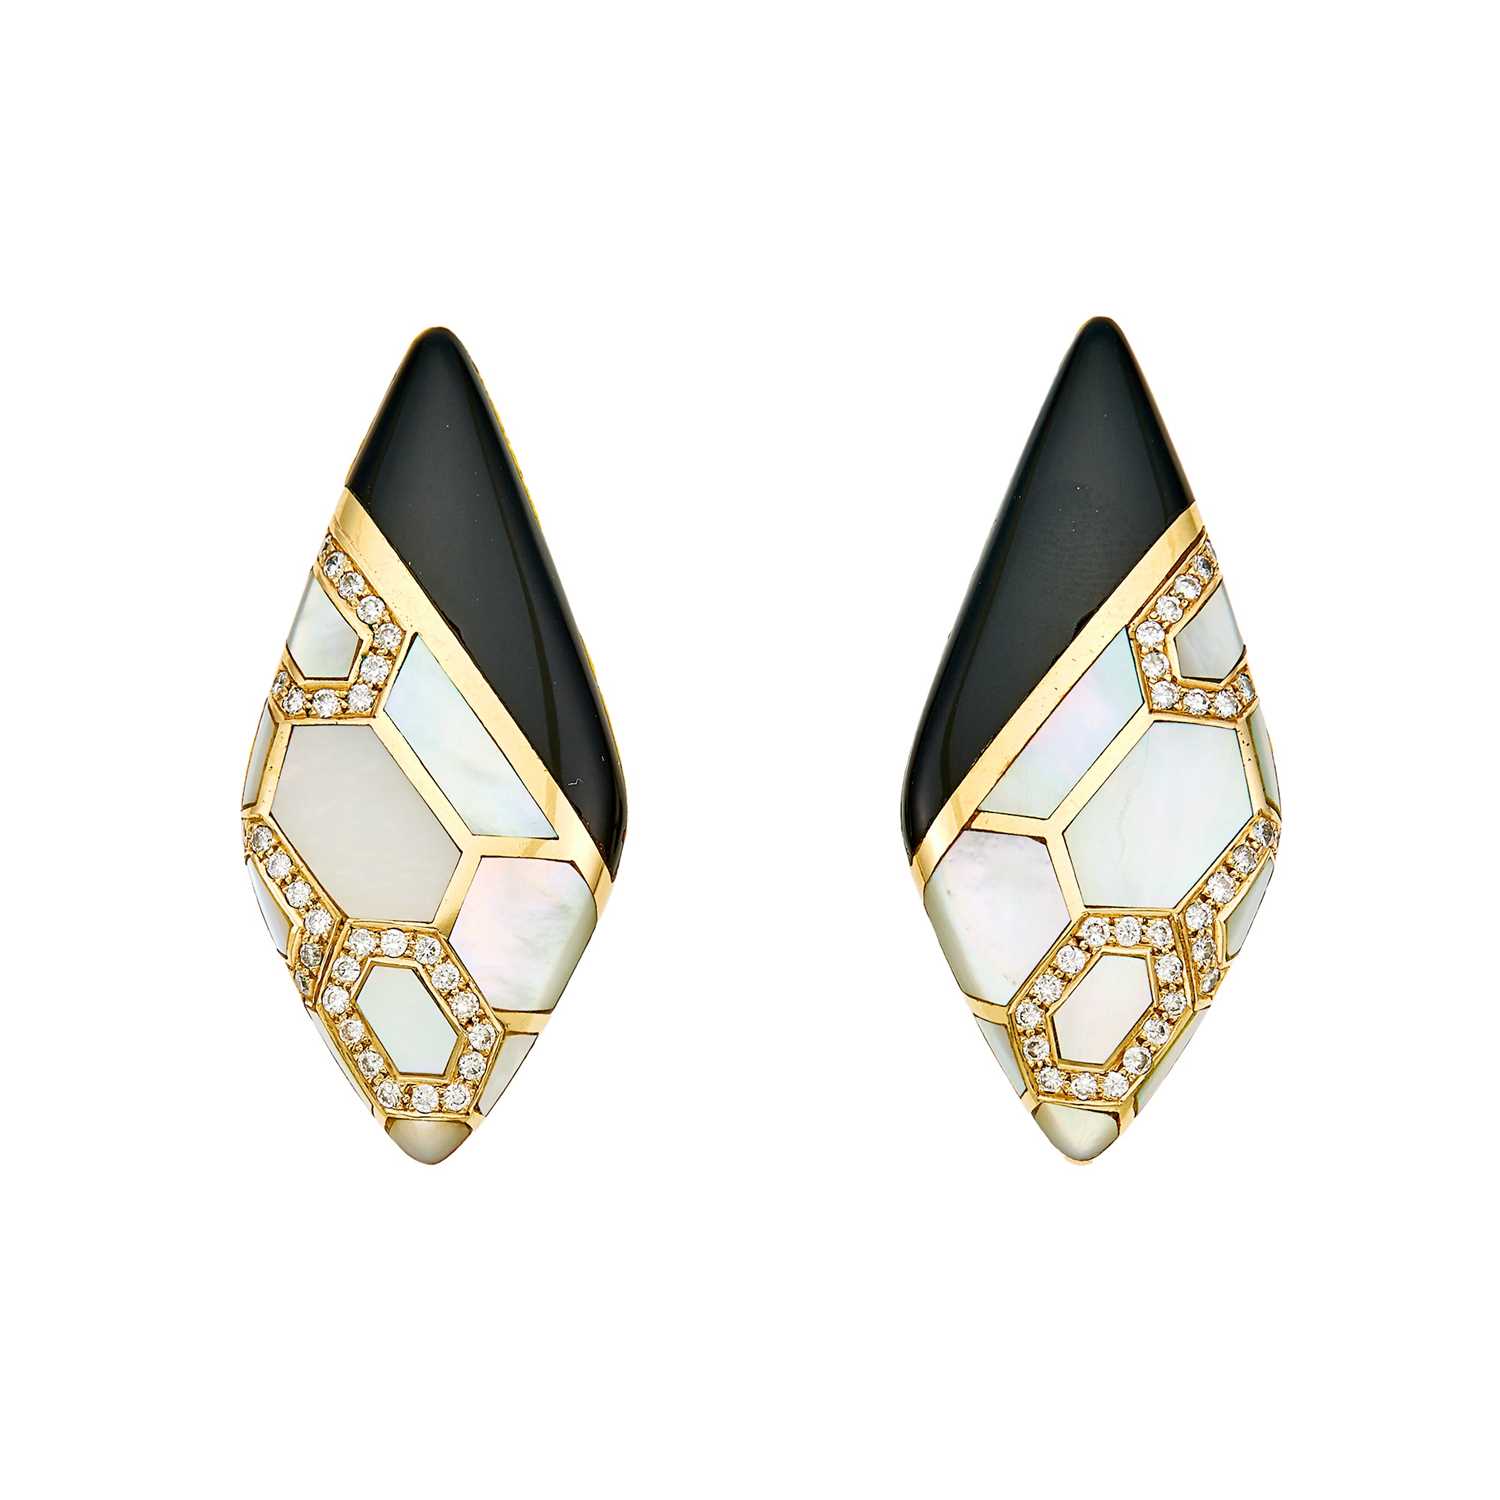 Lot 1230 - Pair of Gold, Diamond, Mother-of-Pearl and Black Onyx Earrings